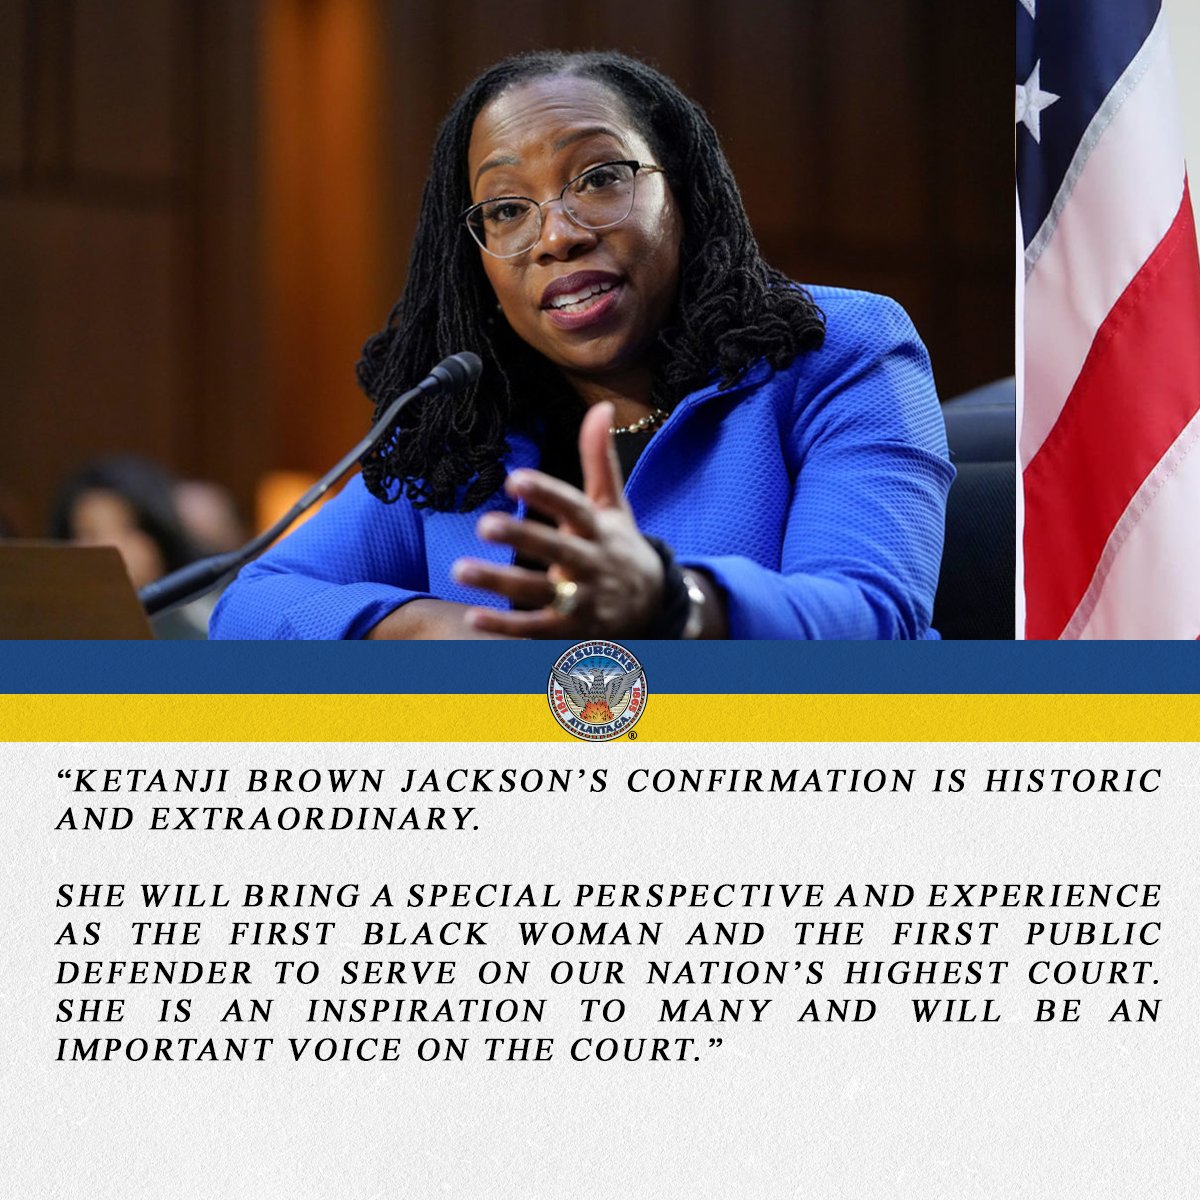 The U.S. Senate recently confirmed Ketanji Brown Jackson to be the first Black woman to serve on the Supreme Court — a truly historic day for the nation